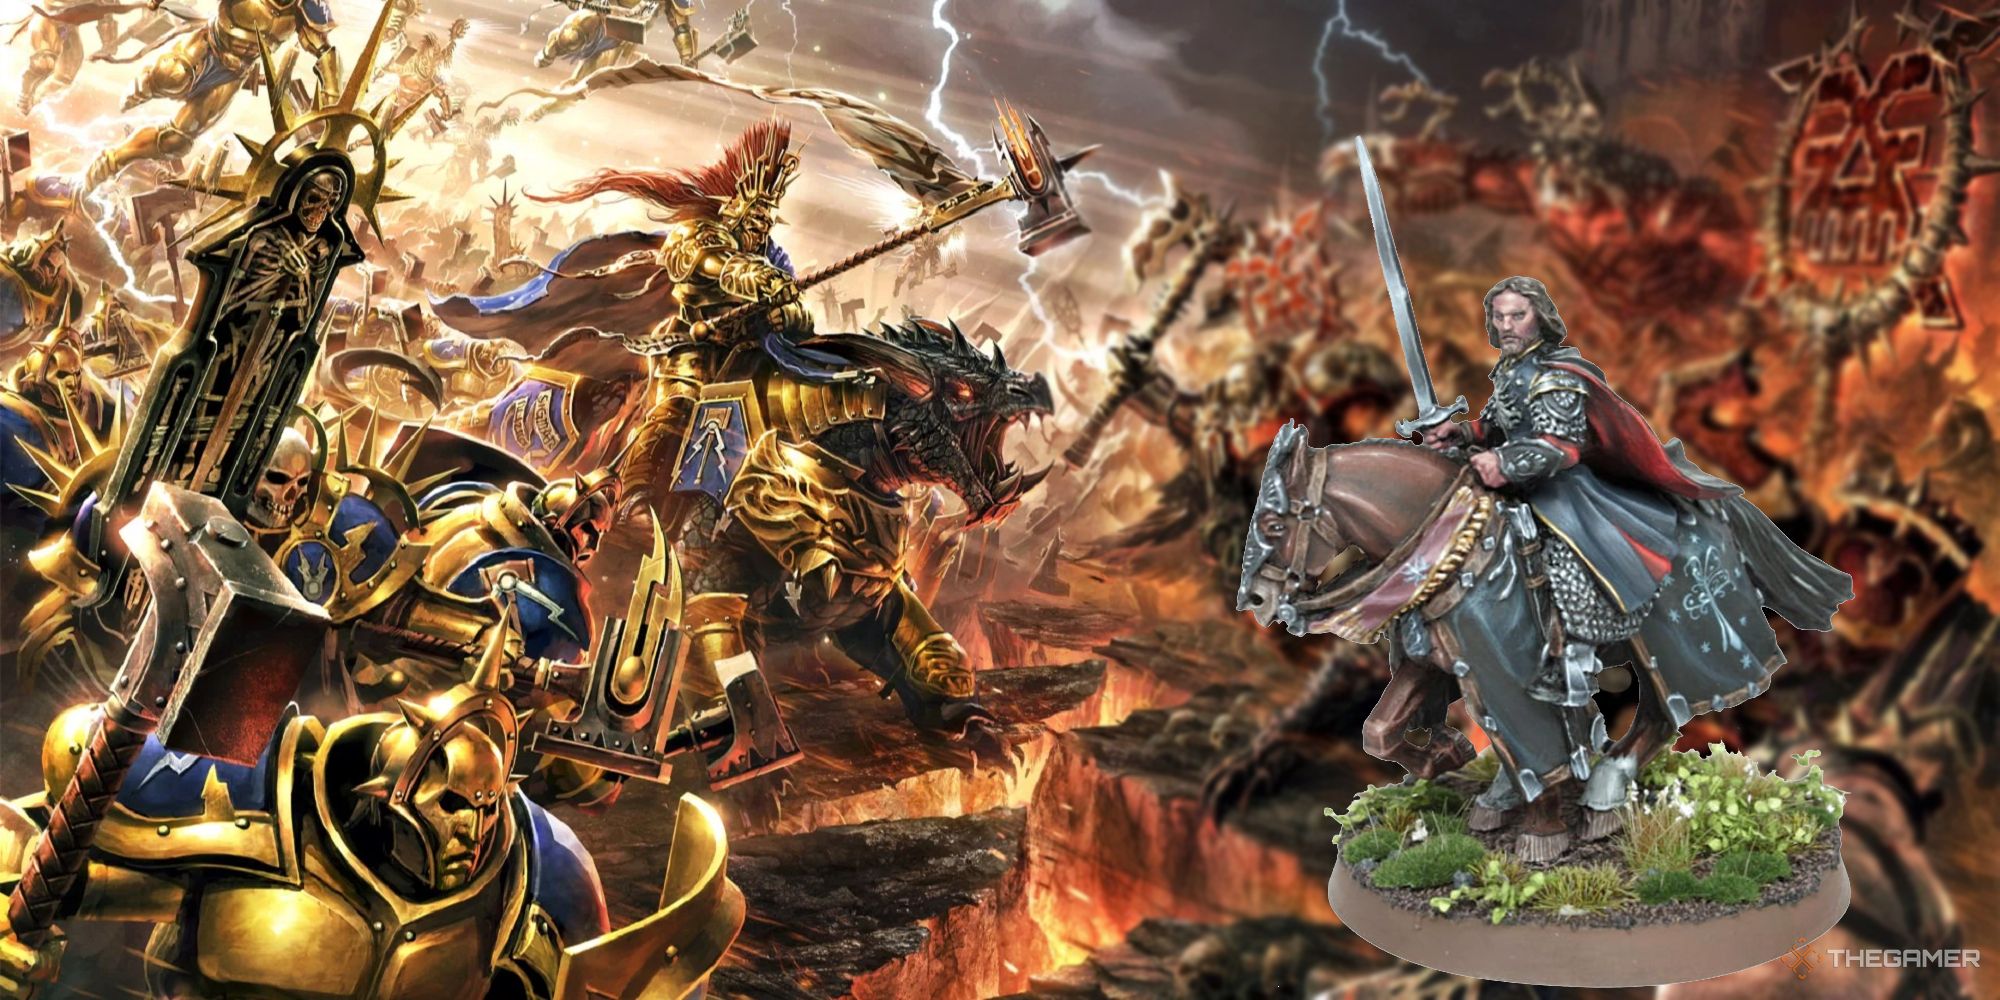 Age of Sigmar Stormcast Eternals facing off against Aragorn from the Lord of the Rings